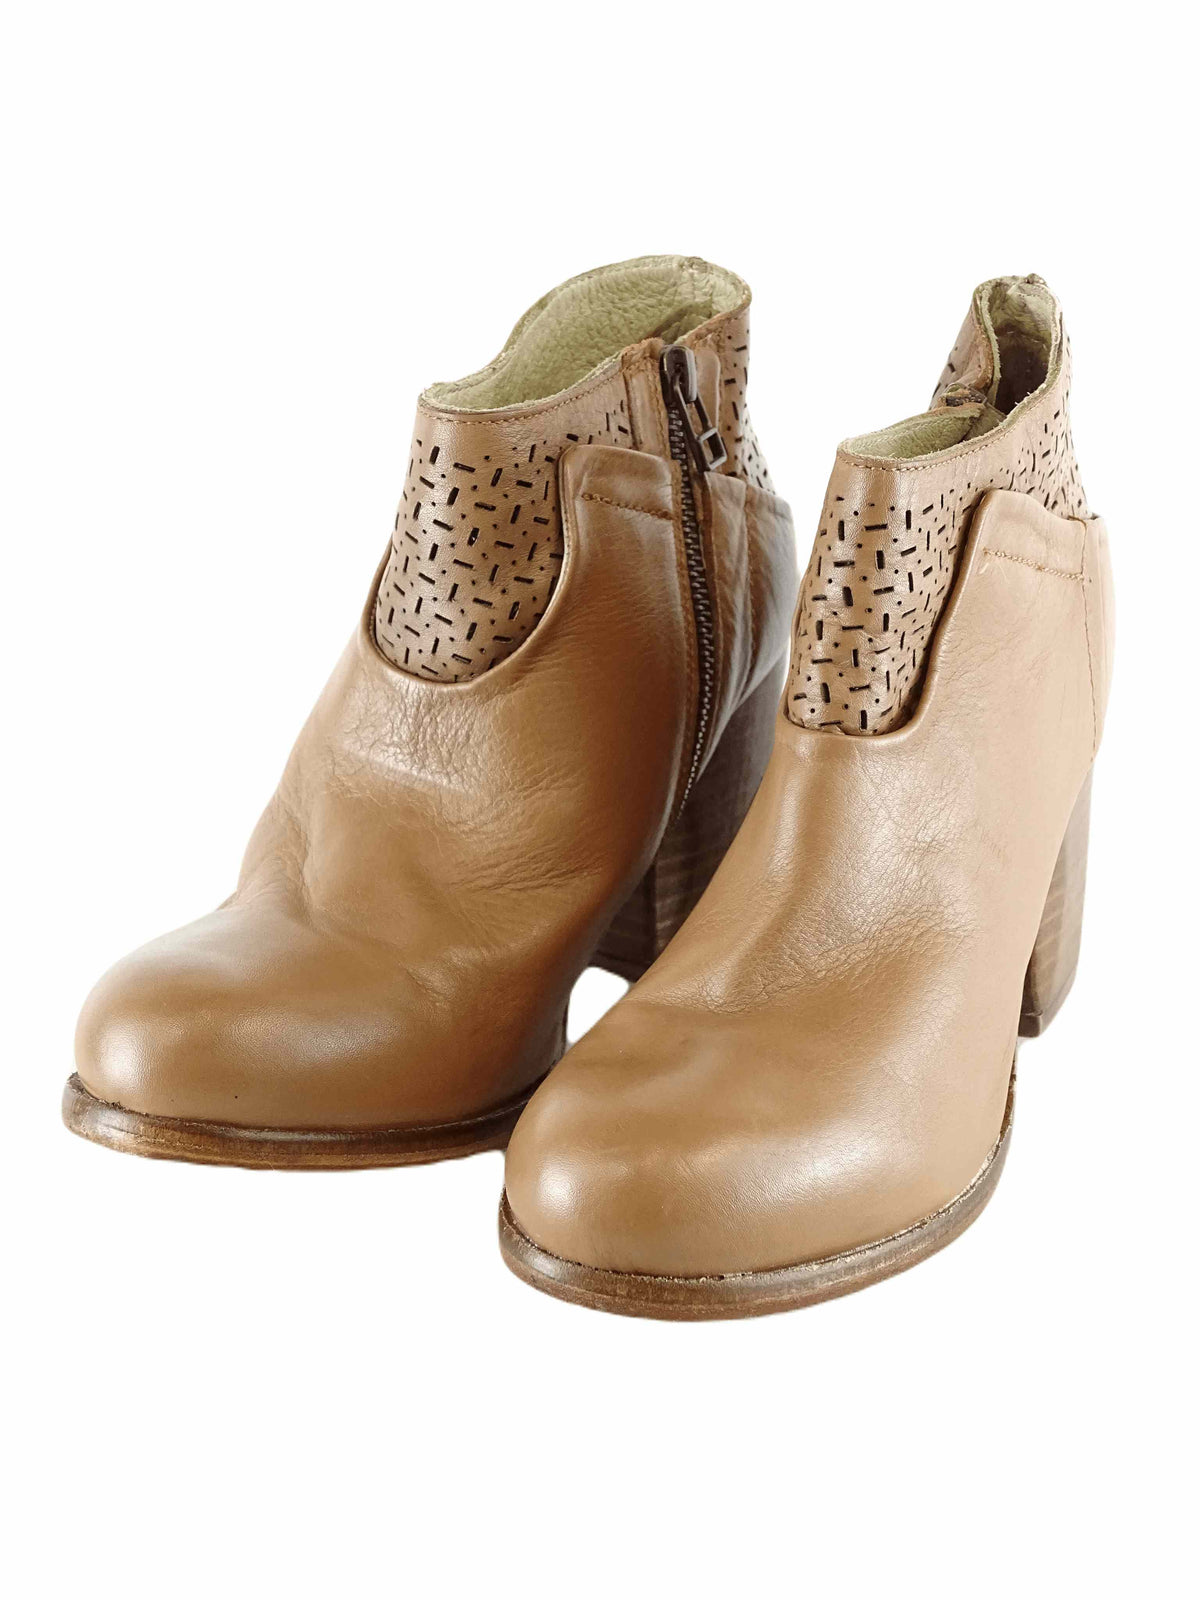 RMK Brown Leather Ankle Boots 37